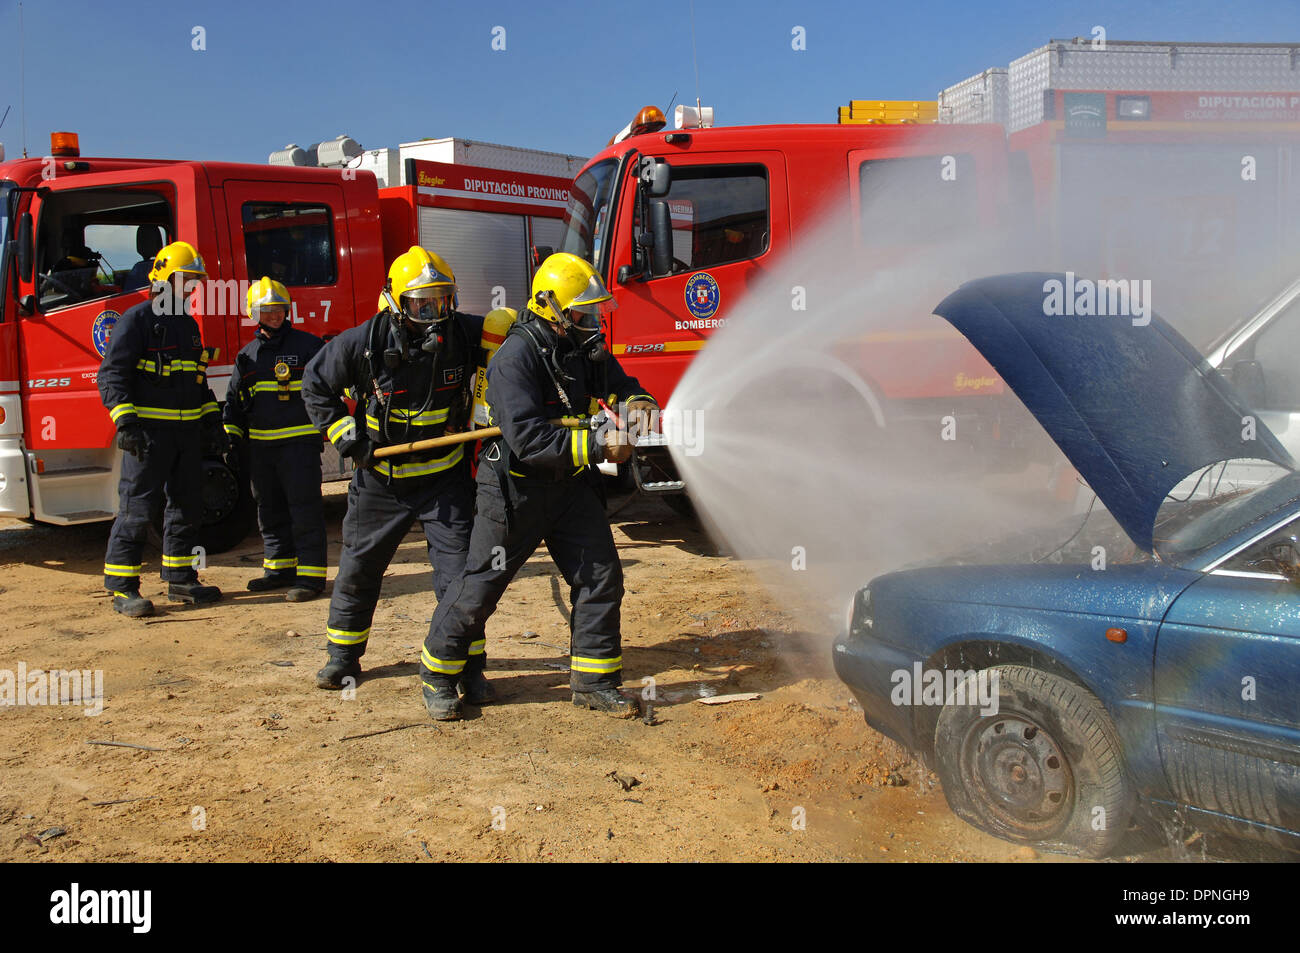 Firefighters, Dos Hermanas, Seville-province, Region of Andalusia, Spain, Europe Stock Photo